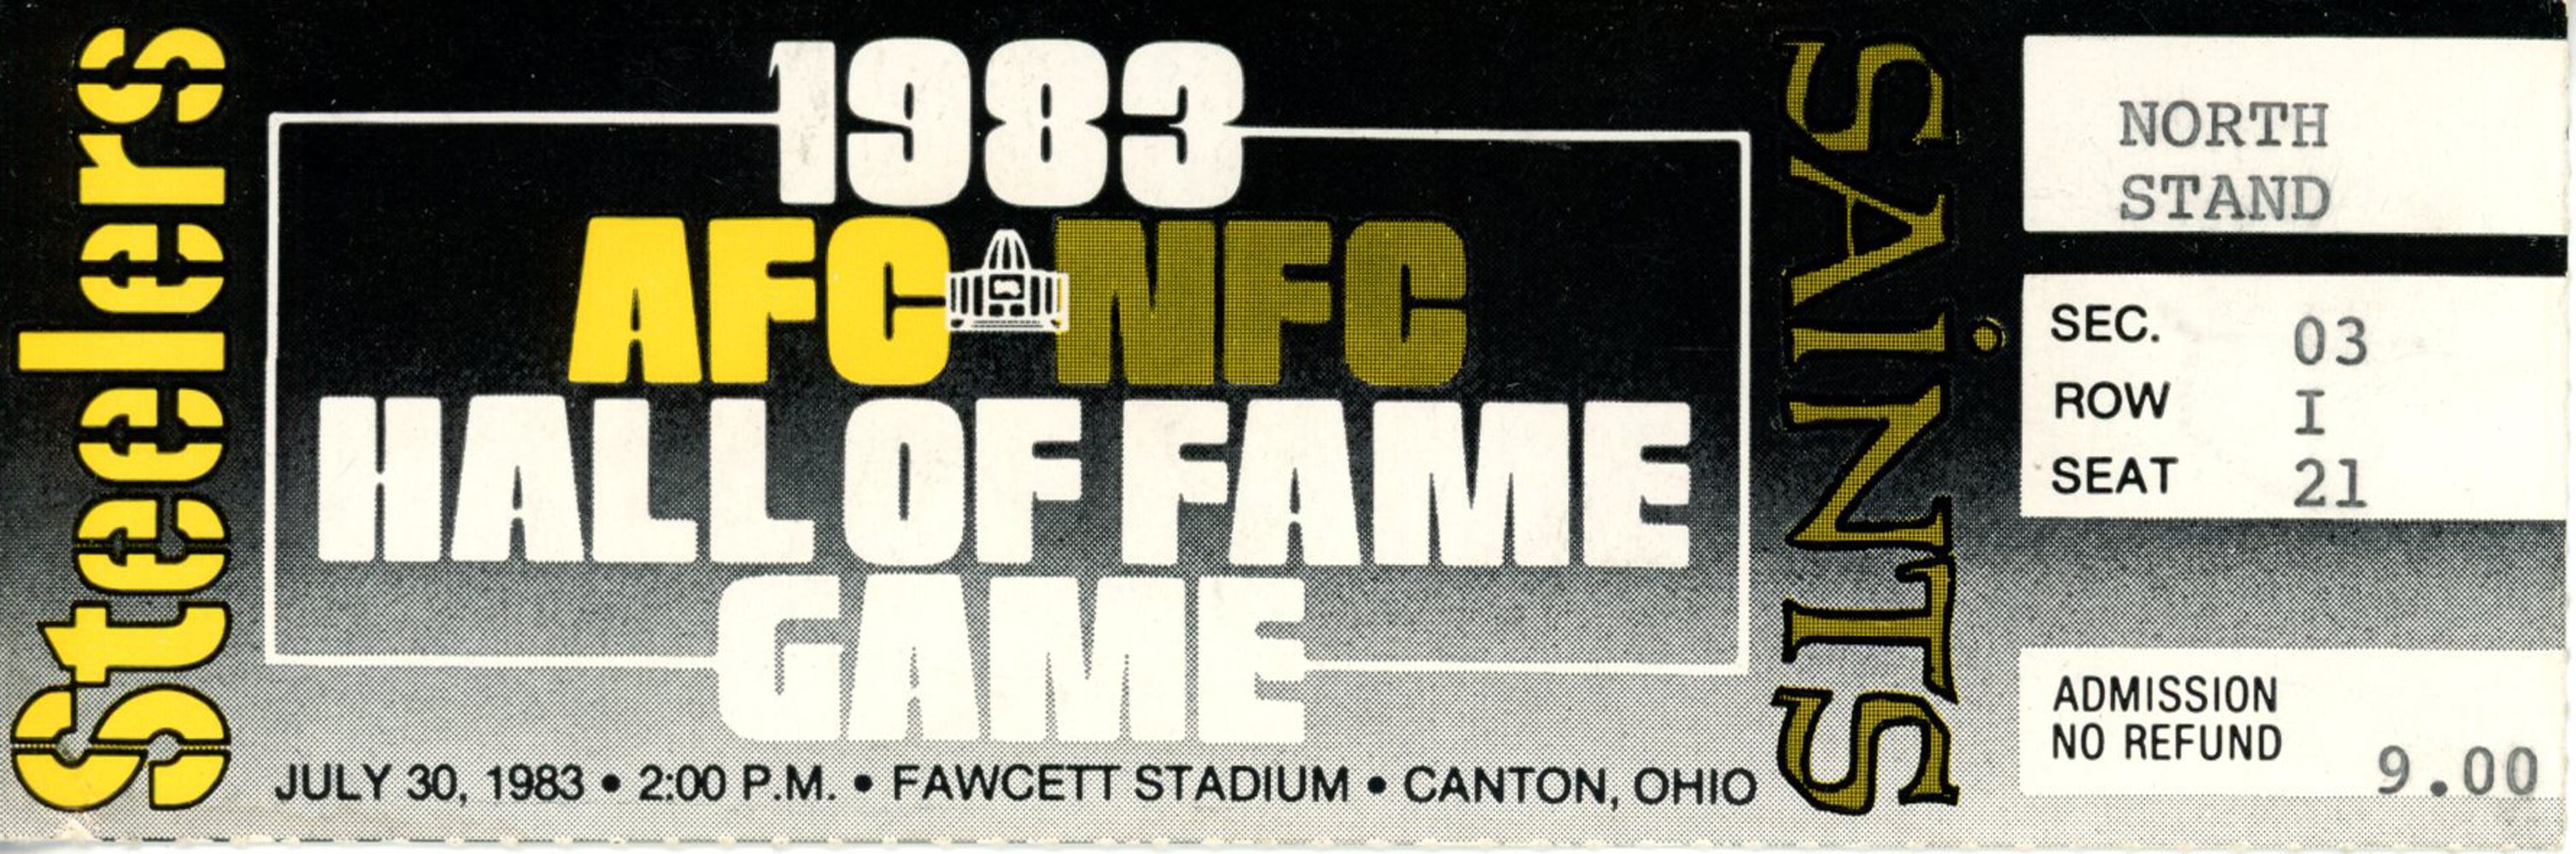 1983 Hall Of Fame Game Ticket Pittsburgh Steelers vs New Orleans Saints